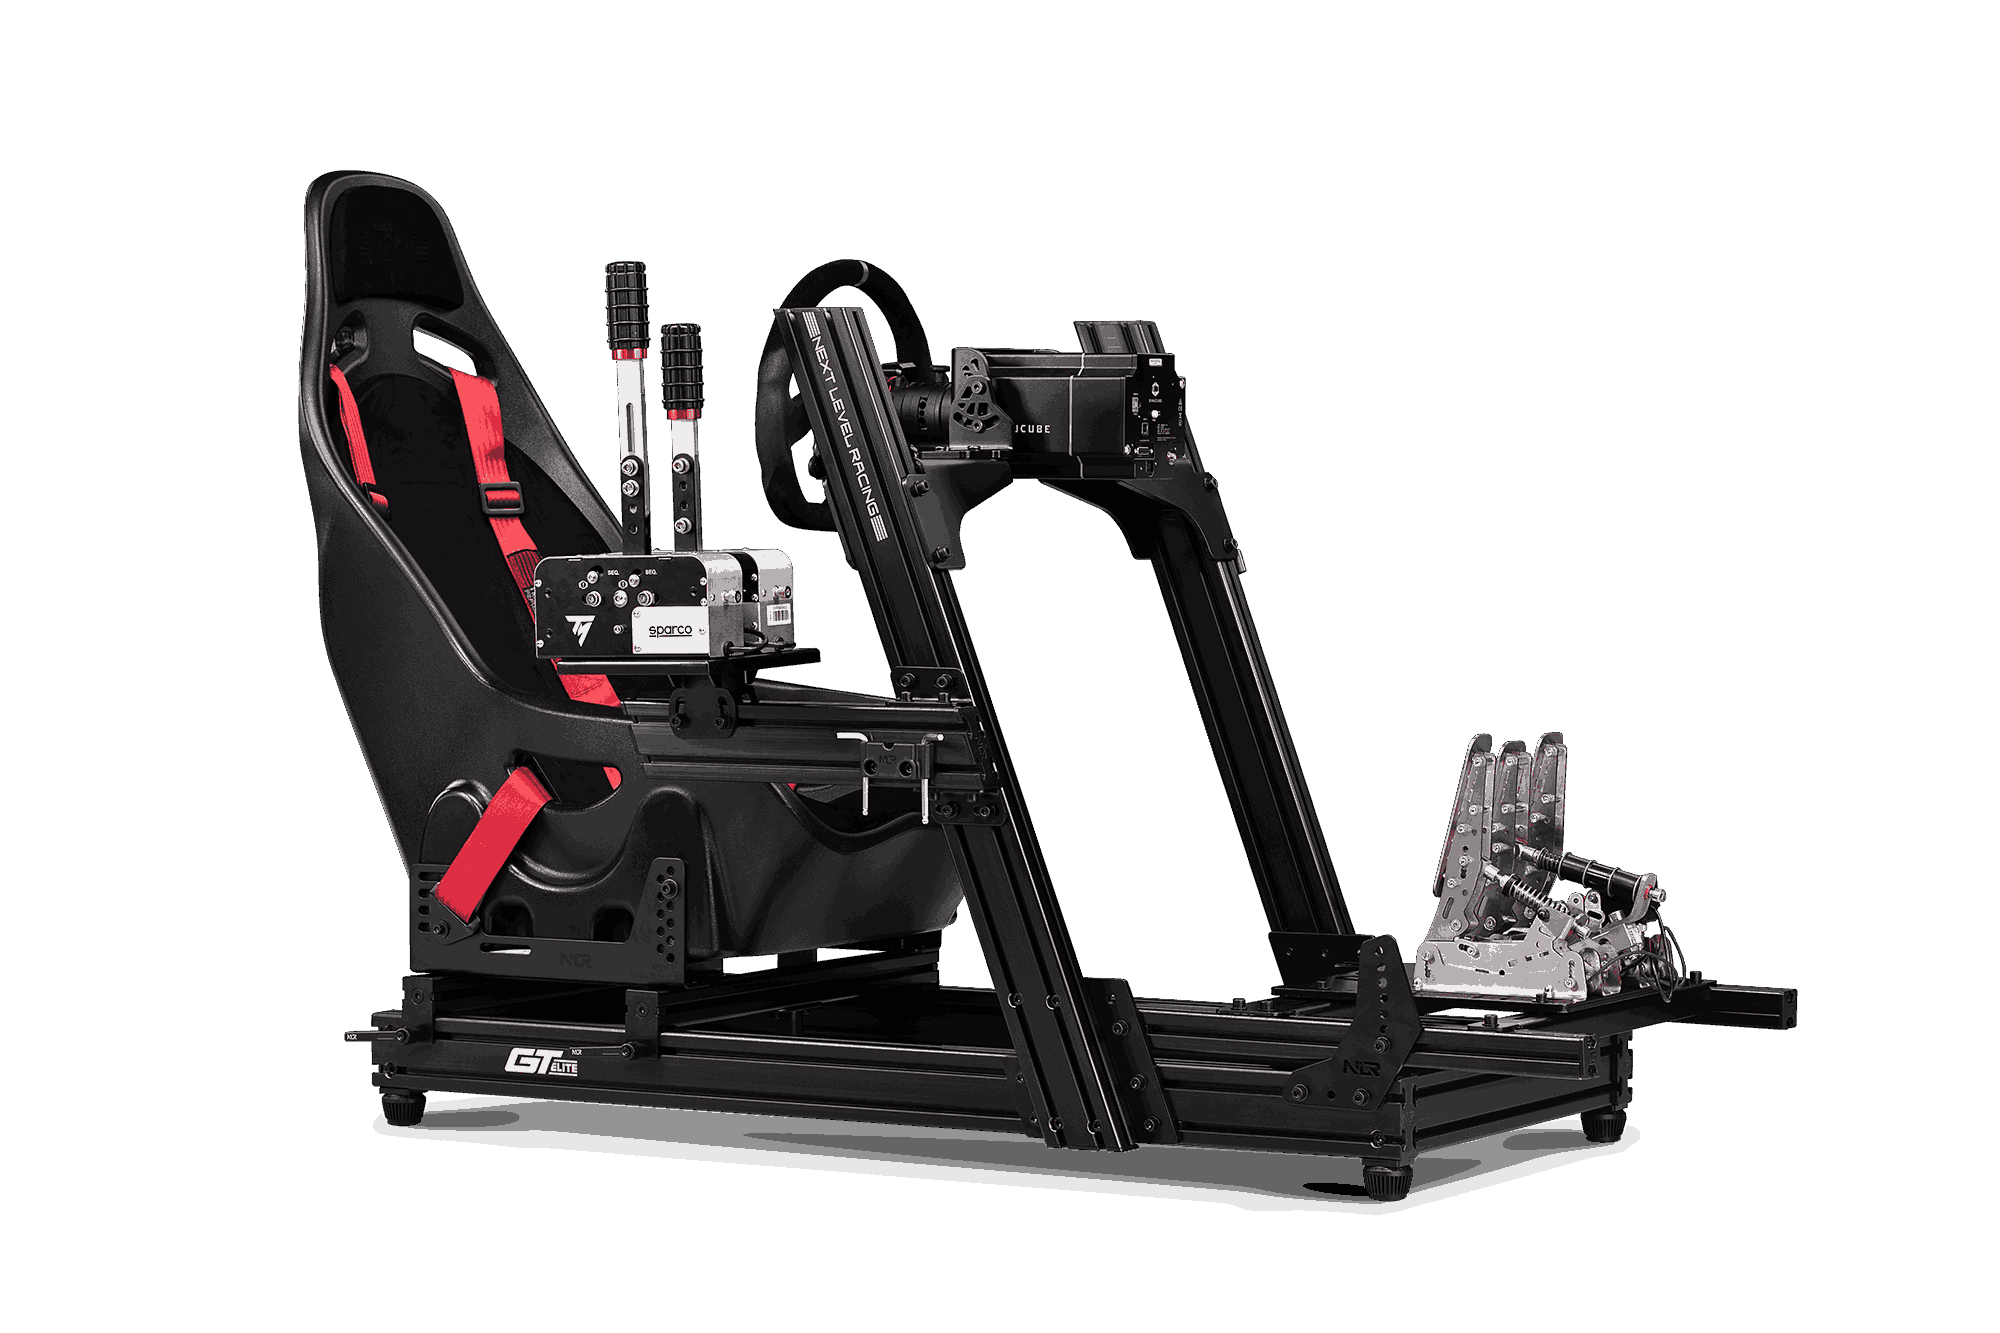 PlayStation Ready 2 Race Complete Racing Simulator Package